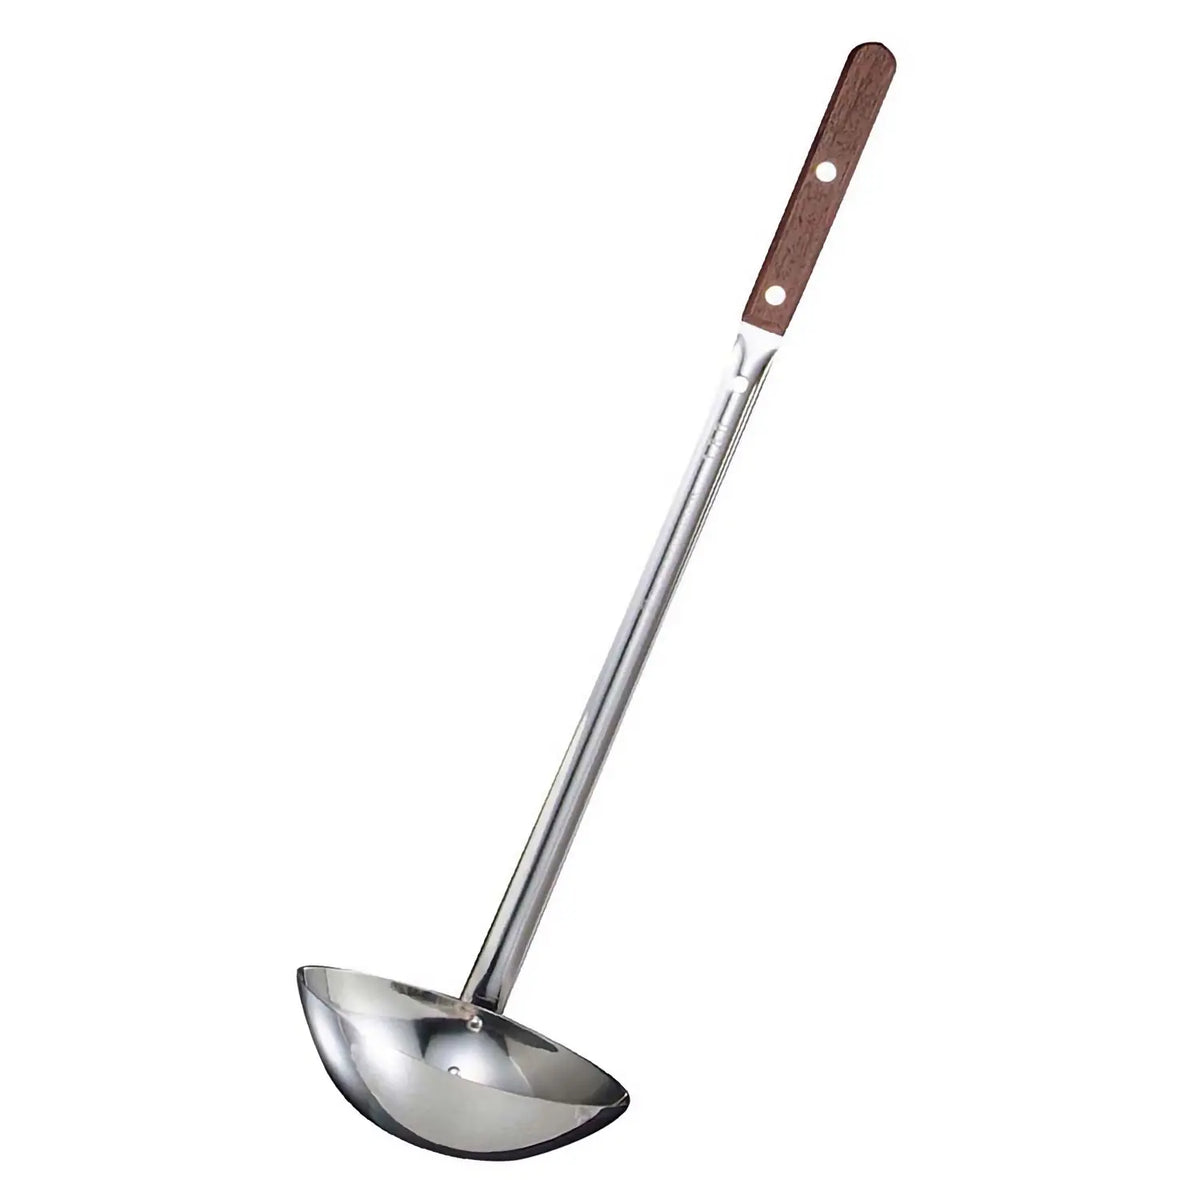 MARUTAMA Stainless Steel Double-Sided-Scooping Long Ladle with Wooden Handle